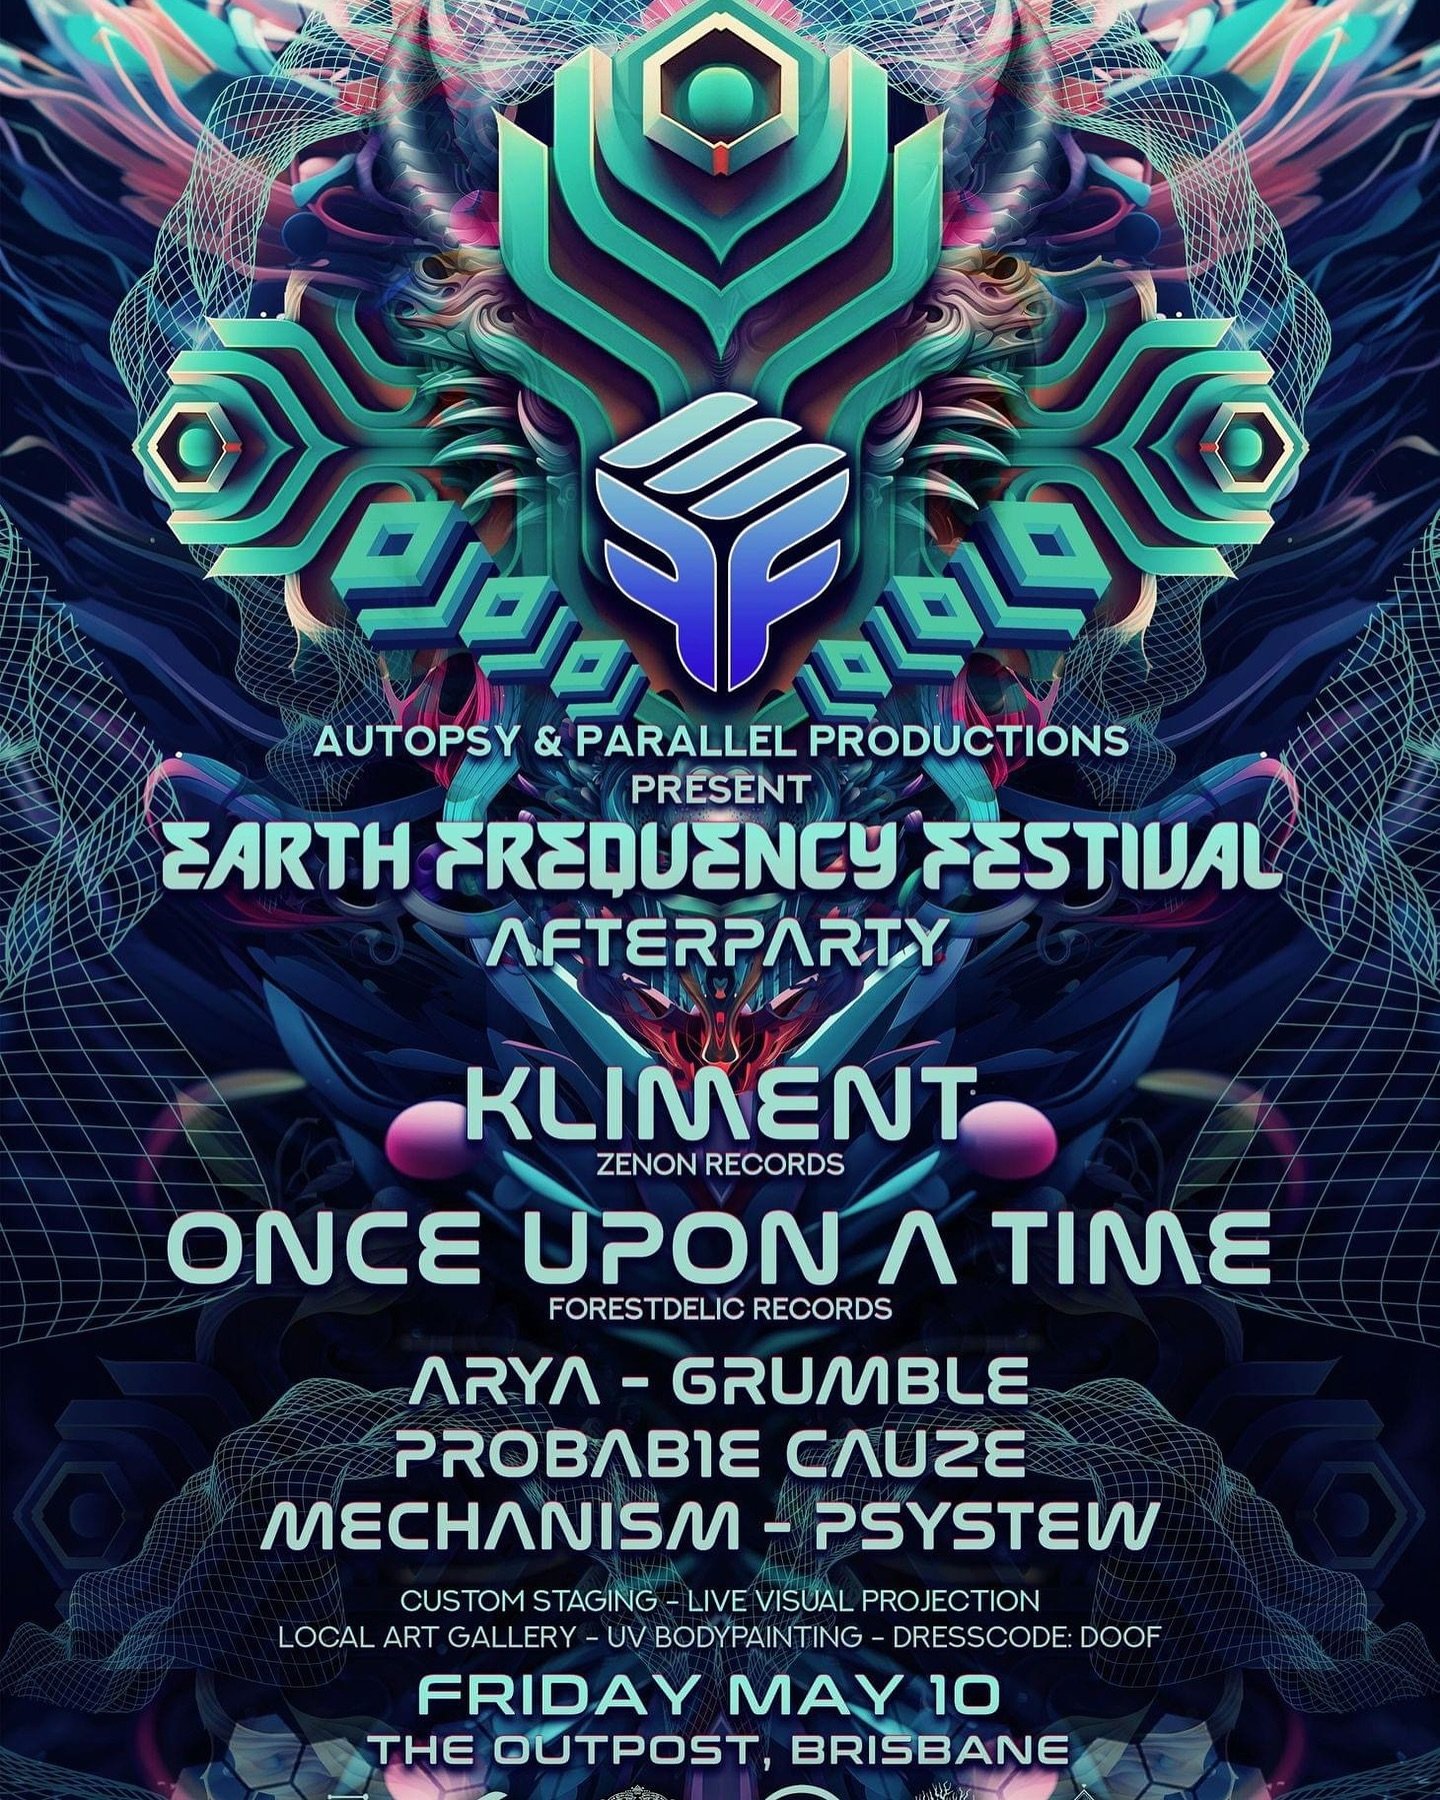 Tonight in Brisbane !! Get another dose of the deep and dark visions of @kliment.once.upon.a.time.

Autopsy and Parallel Productions are joining force to bring you an incredible lineup from the darker side of the festival lineup with Kliment and Once